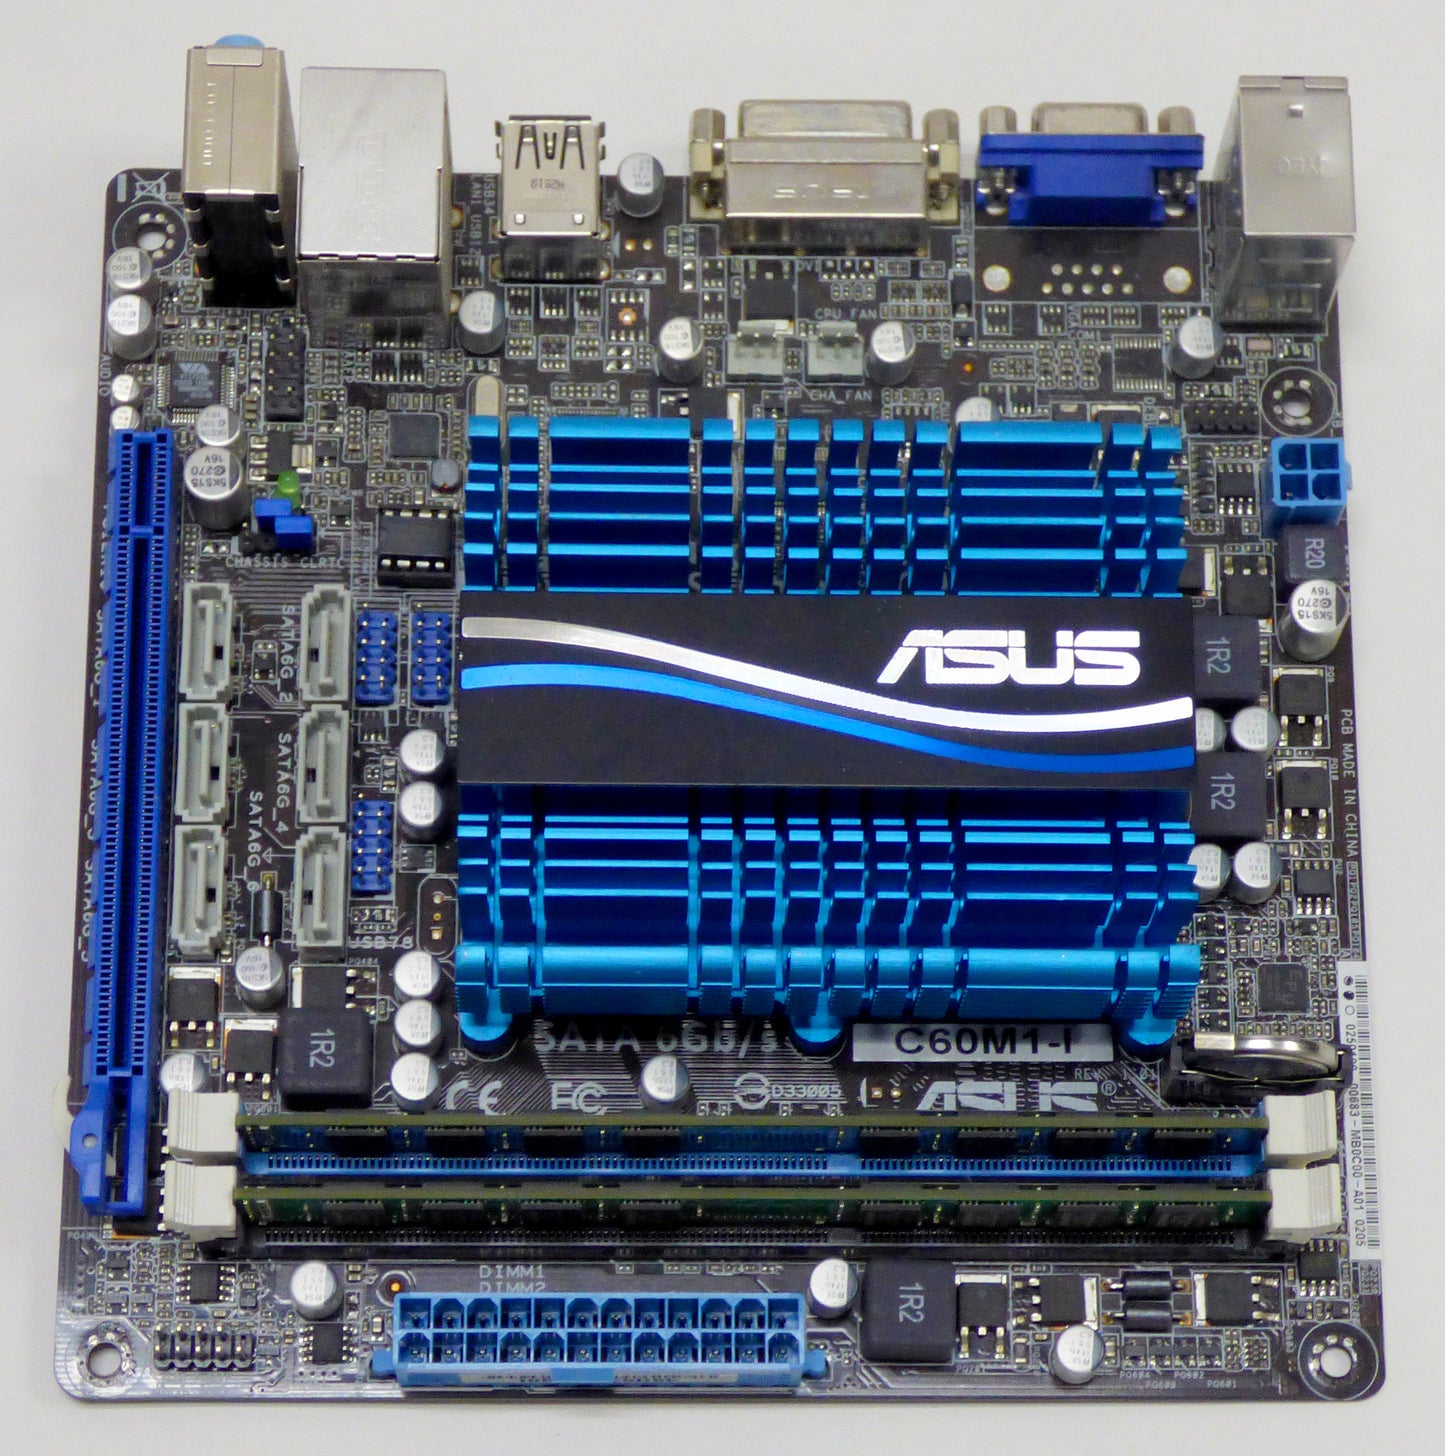 ASUS C60M1-I SATA 6Gb/s Motherboard Combo with 8GB DDR3 RAM